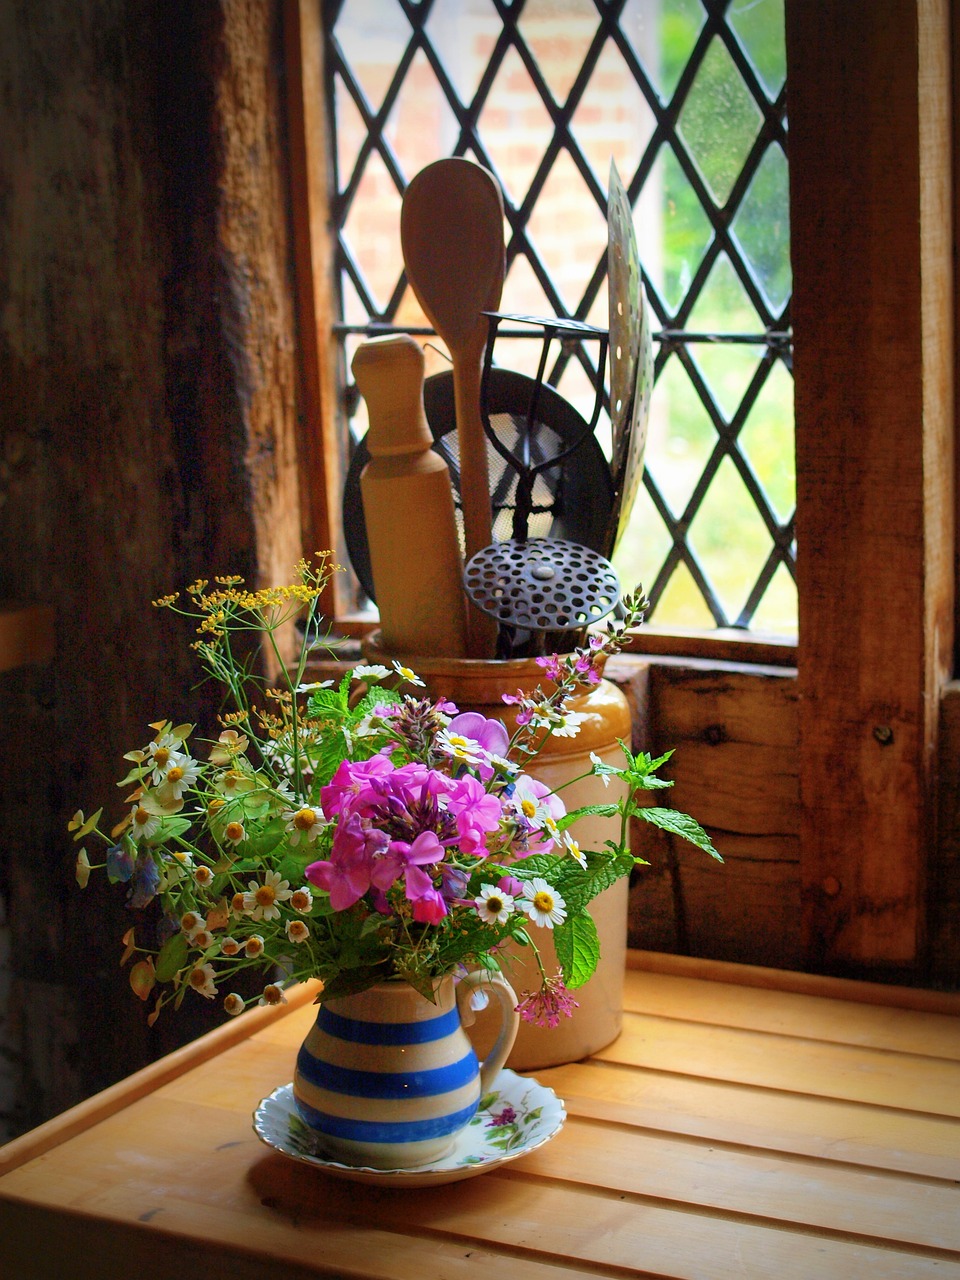 Home with vintage vase